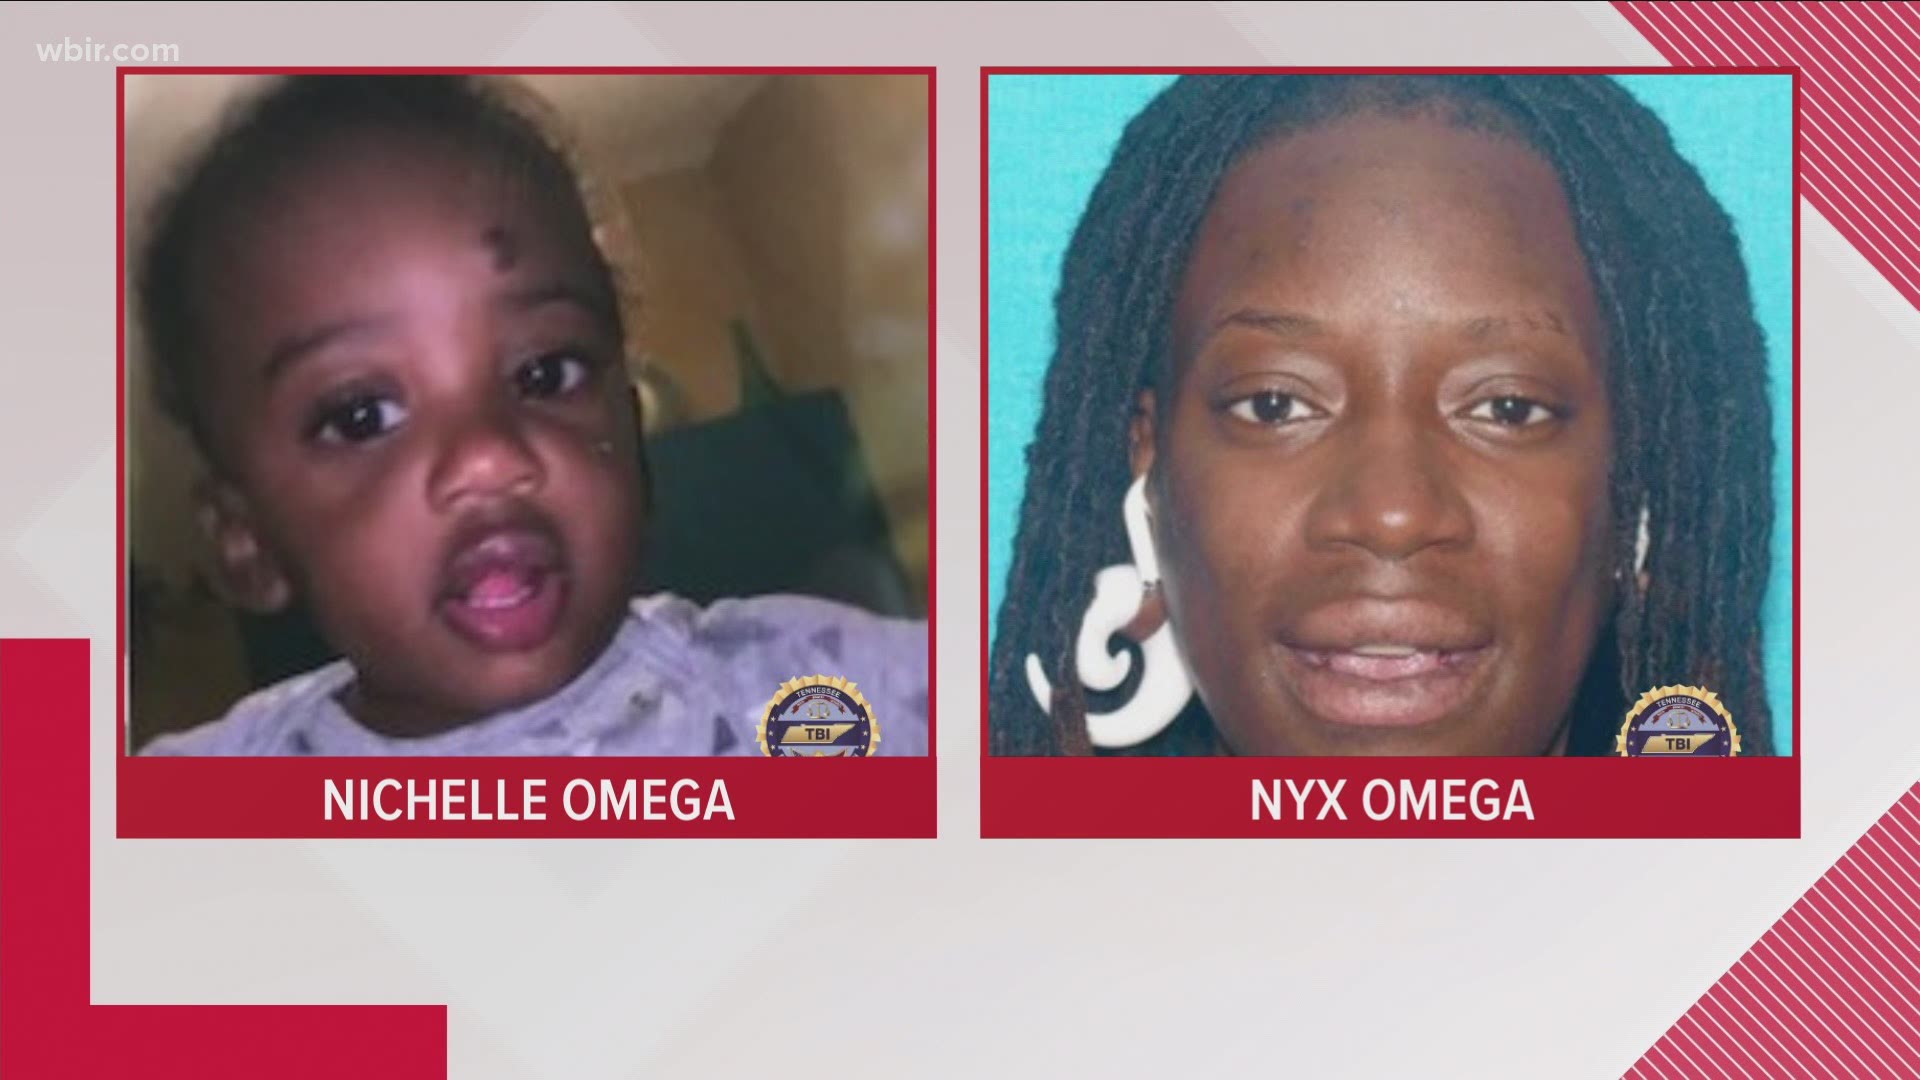 Officials said 9-month-old Nichelle Simone Omegal could be with her non-custodial mother, Nyx Omega.